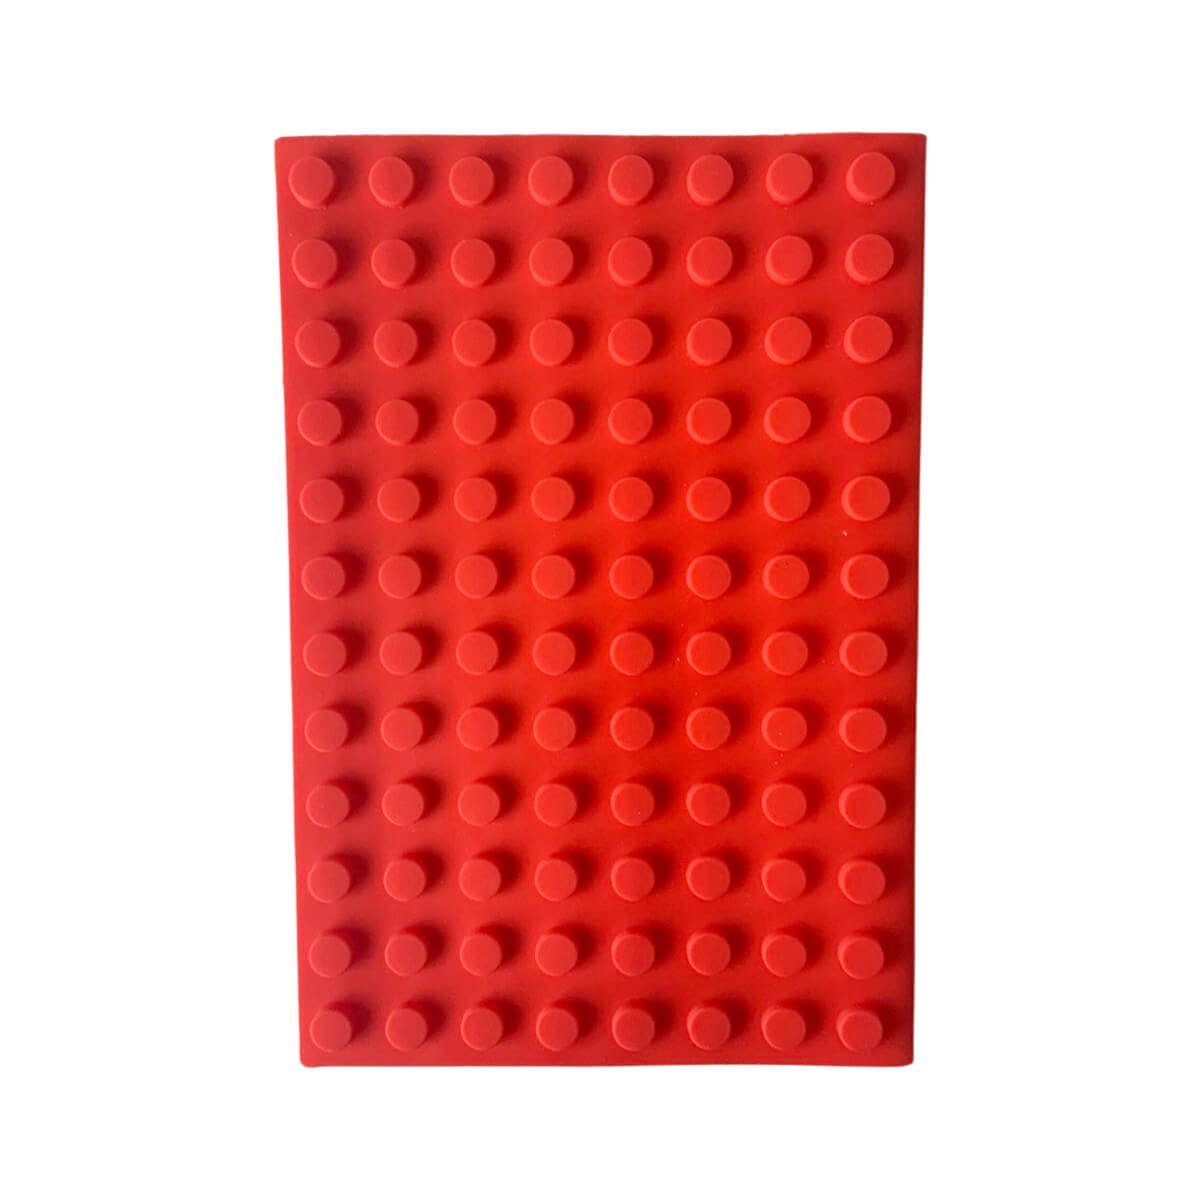 Red A5 page Lego Cover Notebook - Little Surprise BoxRed A5 page Lego Cover Notebook